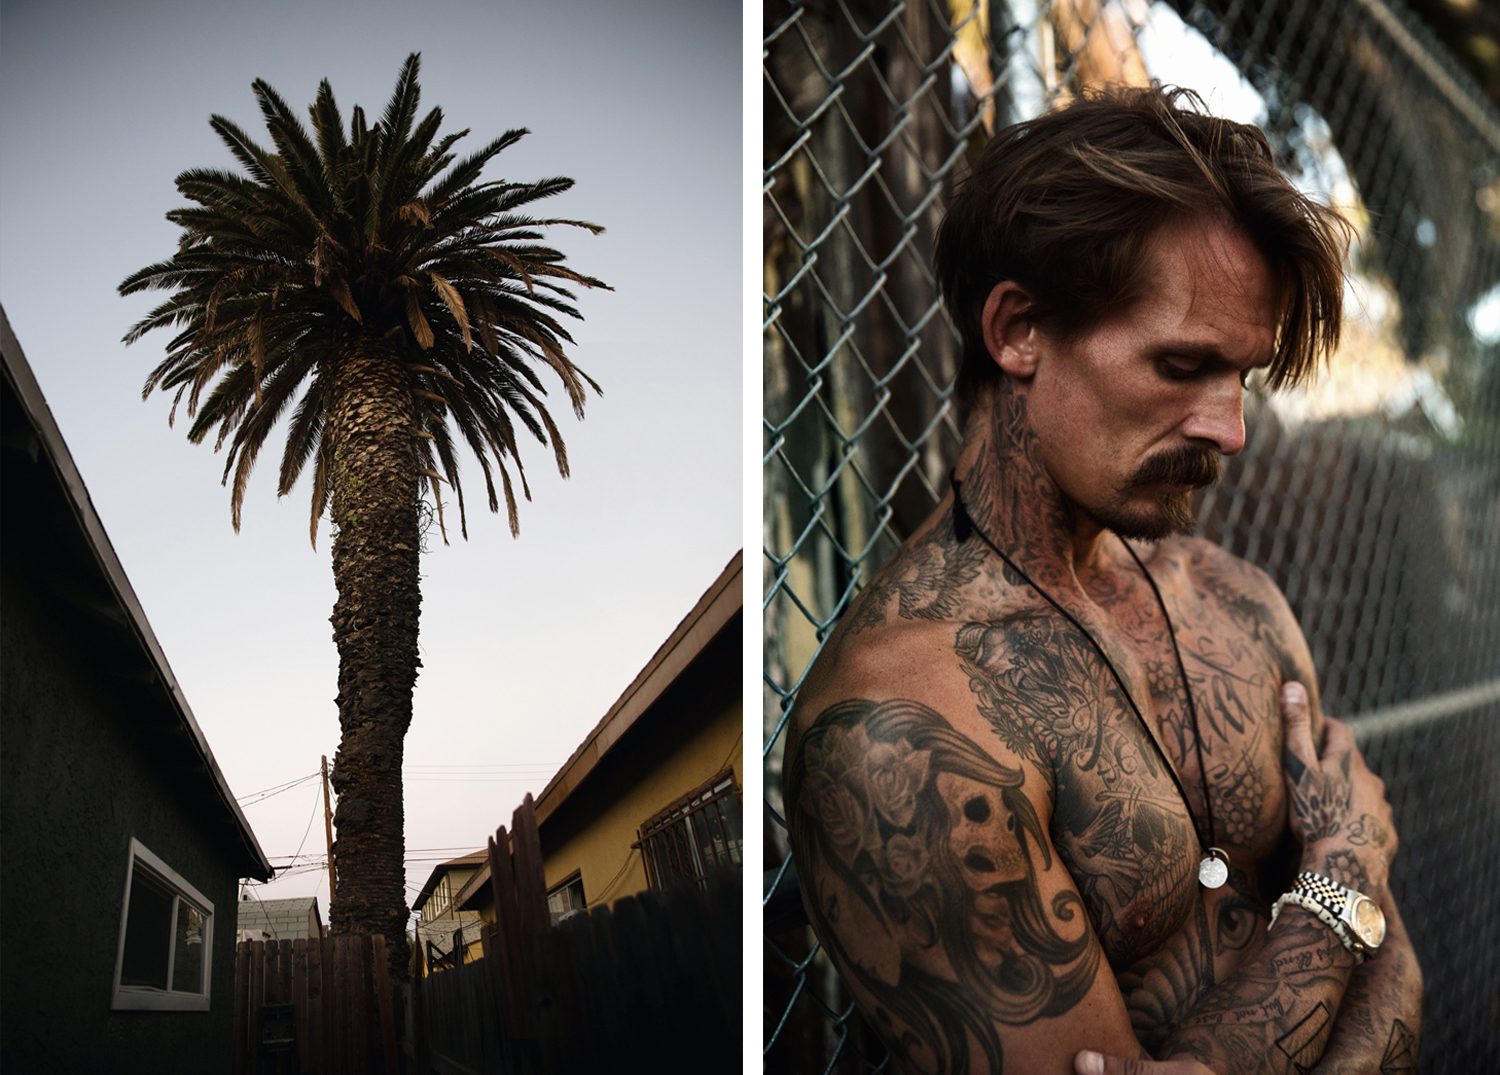 a picture of a palm tree next to a picture of a tattooed guy leaning agains a fence